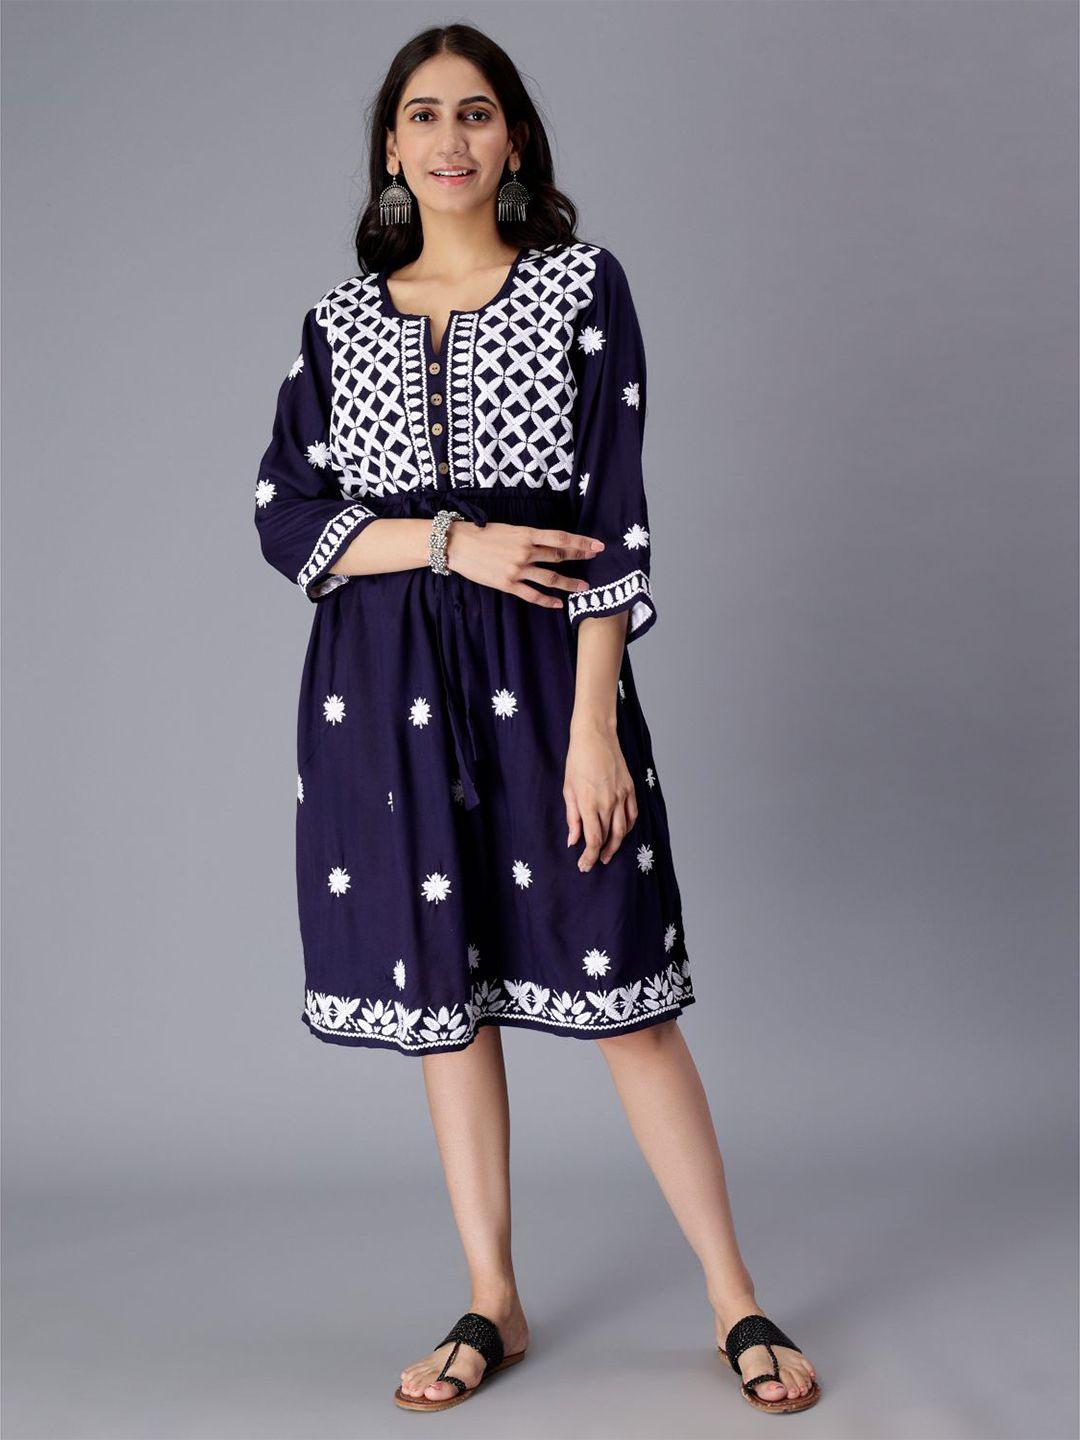 saakaa floral embroidered a-line dress